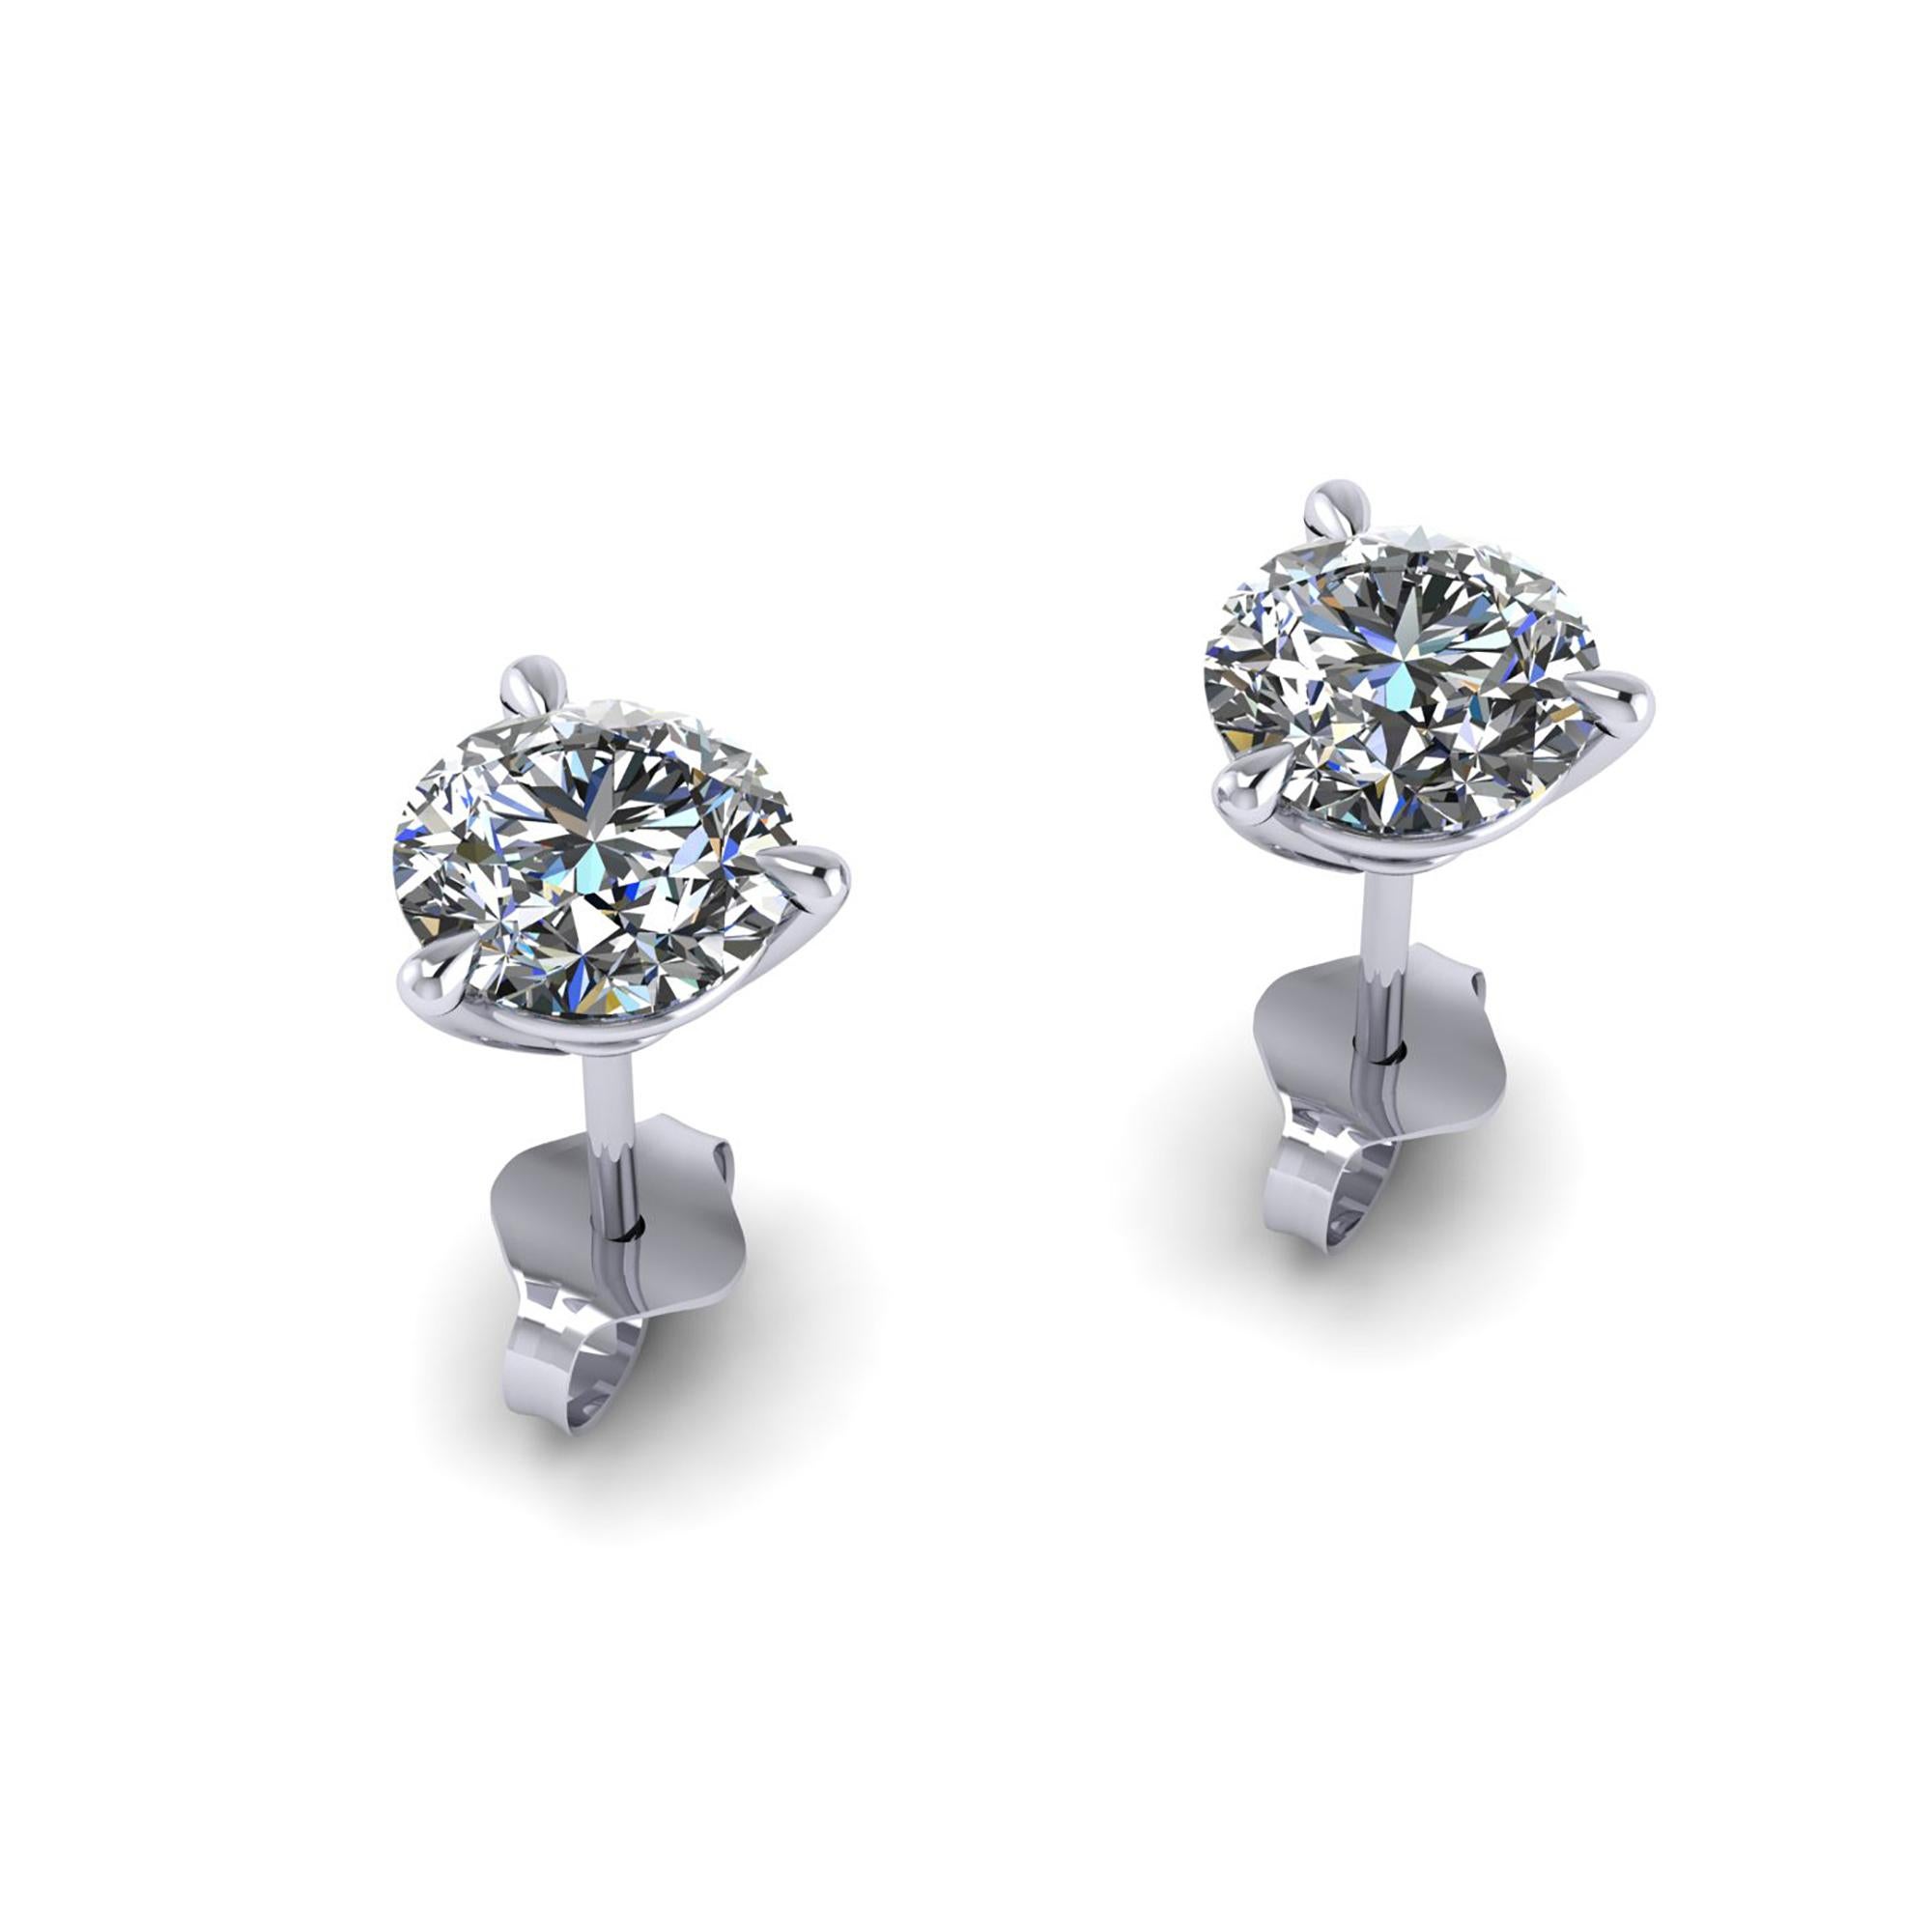 GIA Certified 2.03 Carat total, Round Diamonds H color, VS1 clarity, Triple Excellent specs, ideal brilliance, quality and style for the value.
 Martini Studs made in Platinum in New York by Italian designer, Low setting style, pret-a-porter, easy